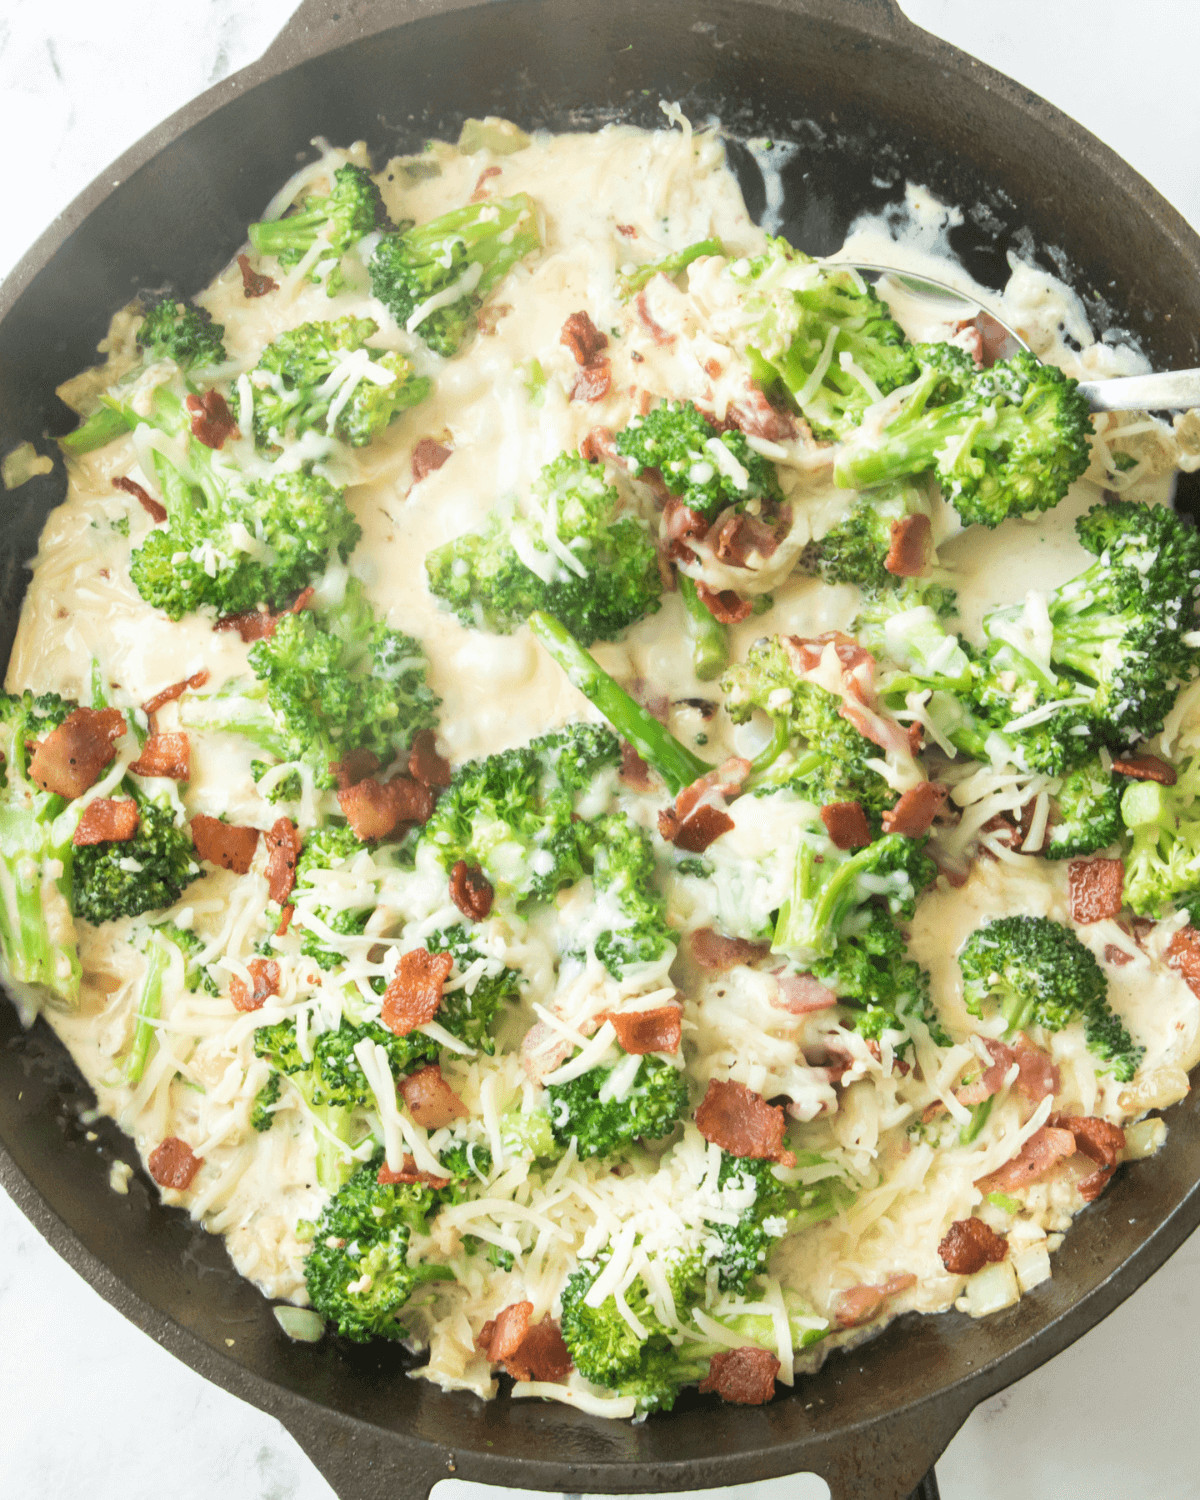 The bacon on top of the Creamy Broccoli in Parmesan Garlic Sauce.